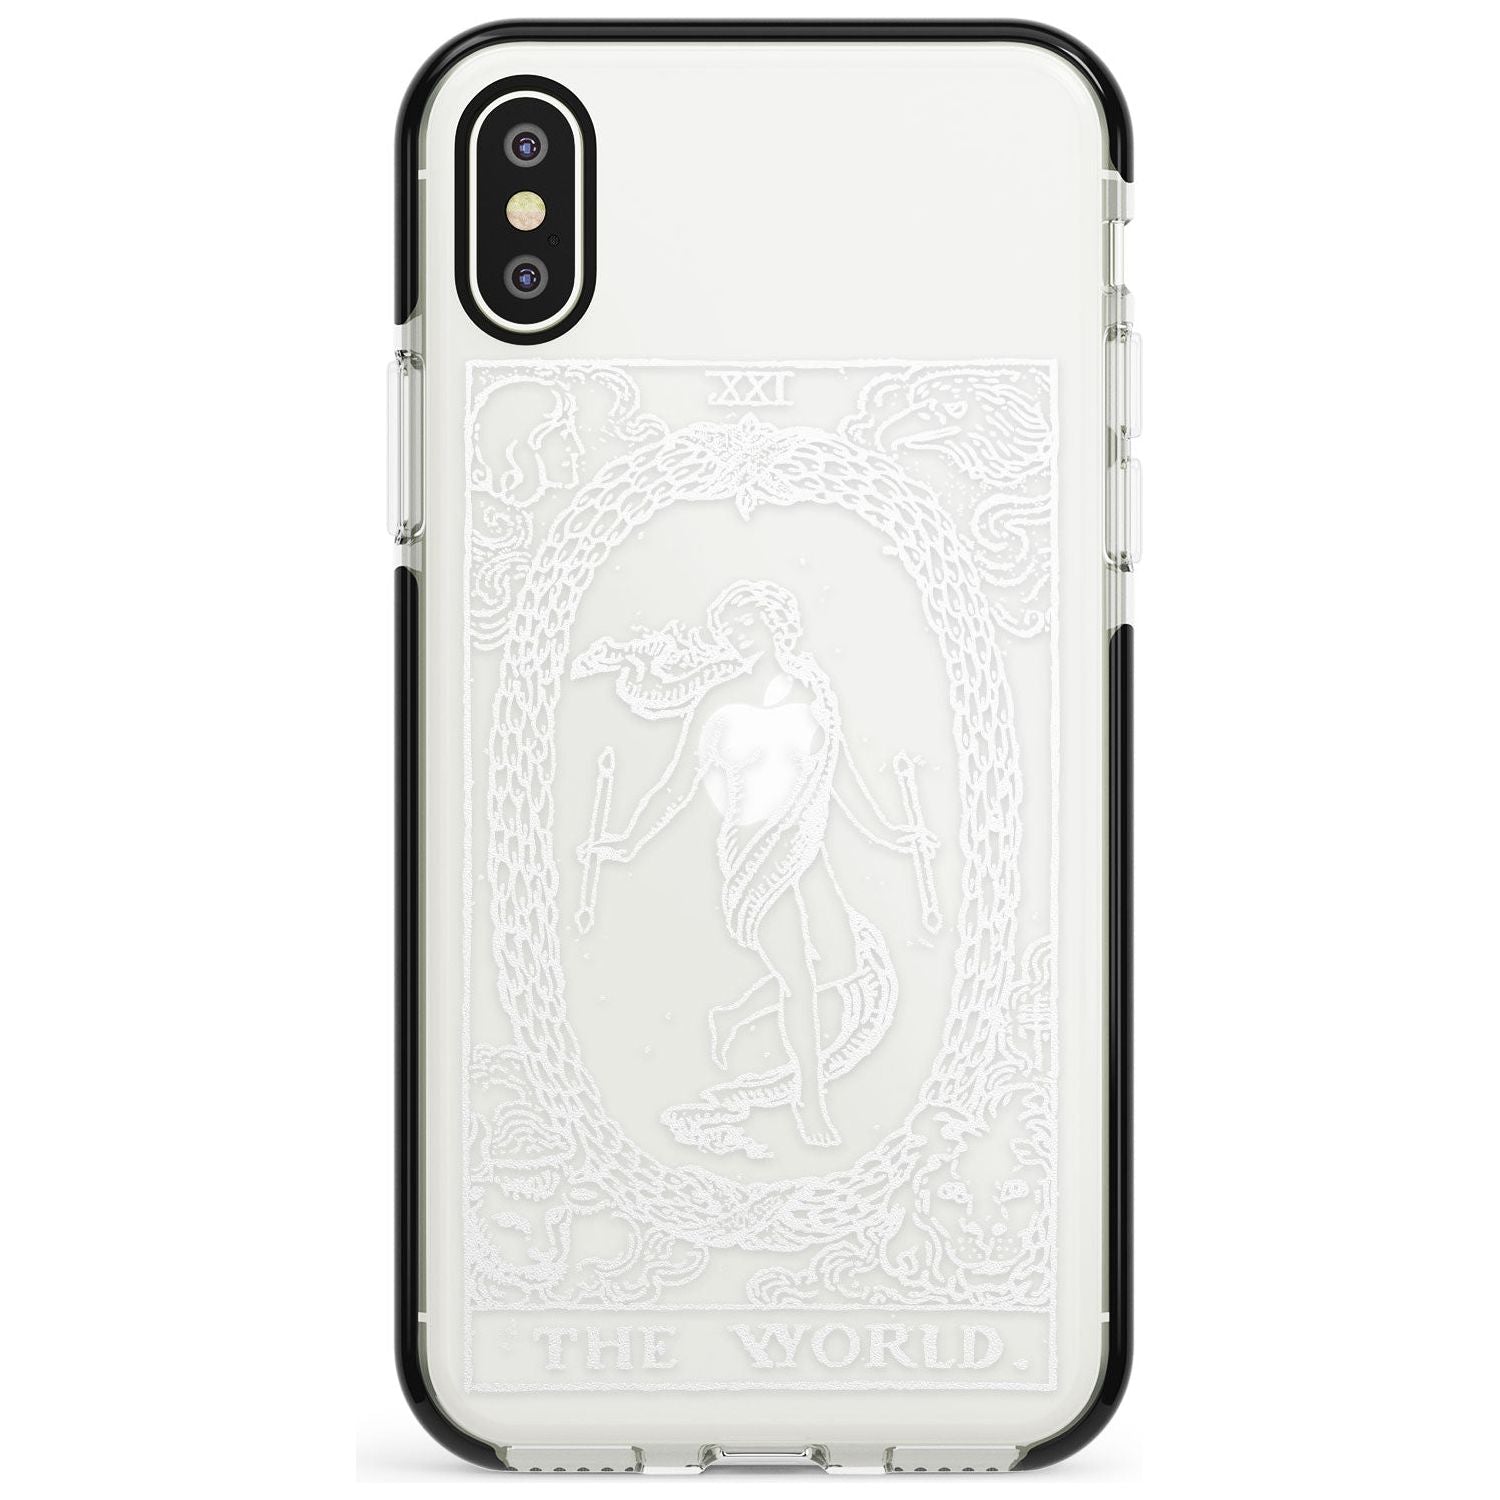 The World Tarot Card - White Transparent Pink Fade Impact Phone Case for iPhone X XS Max XR